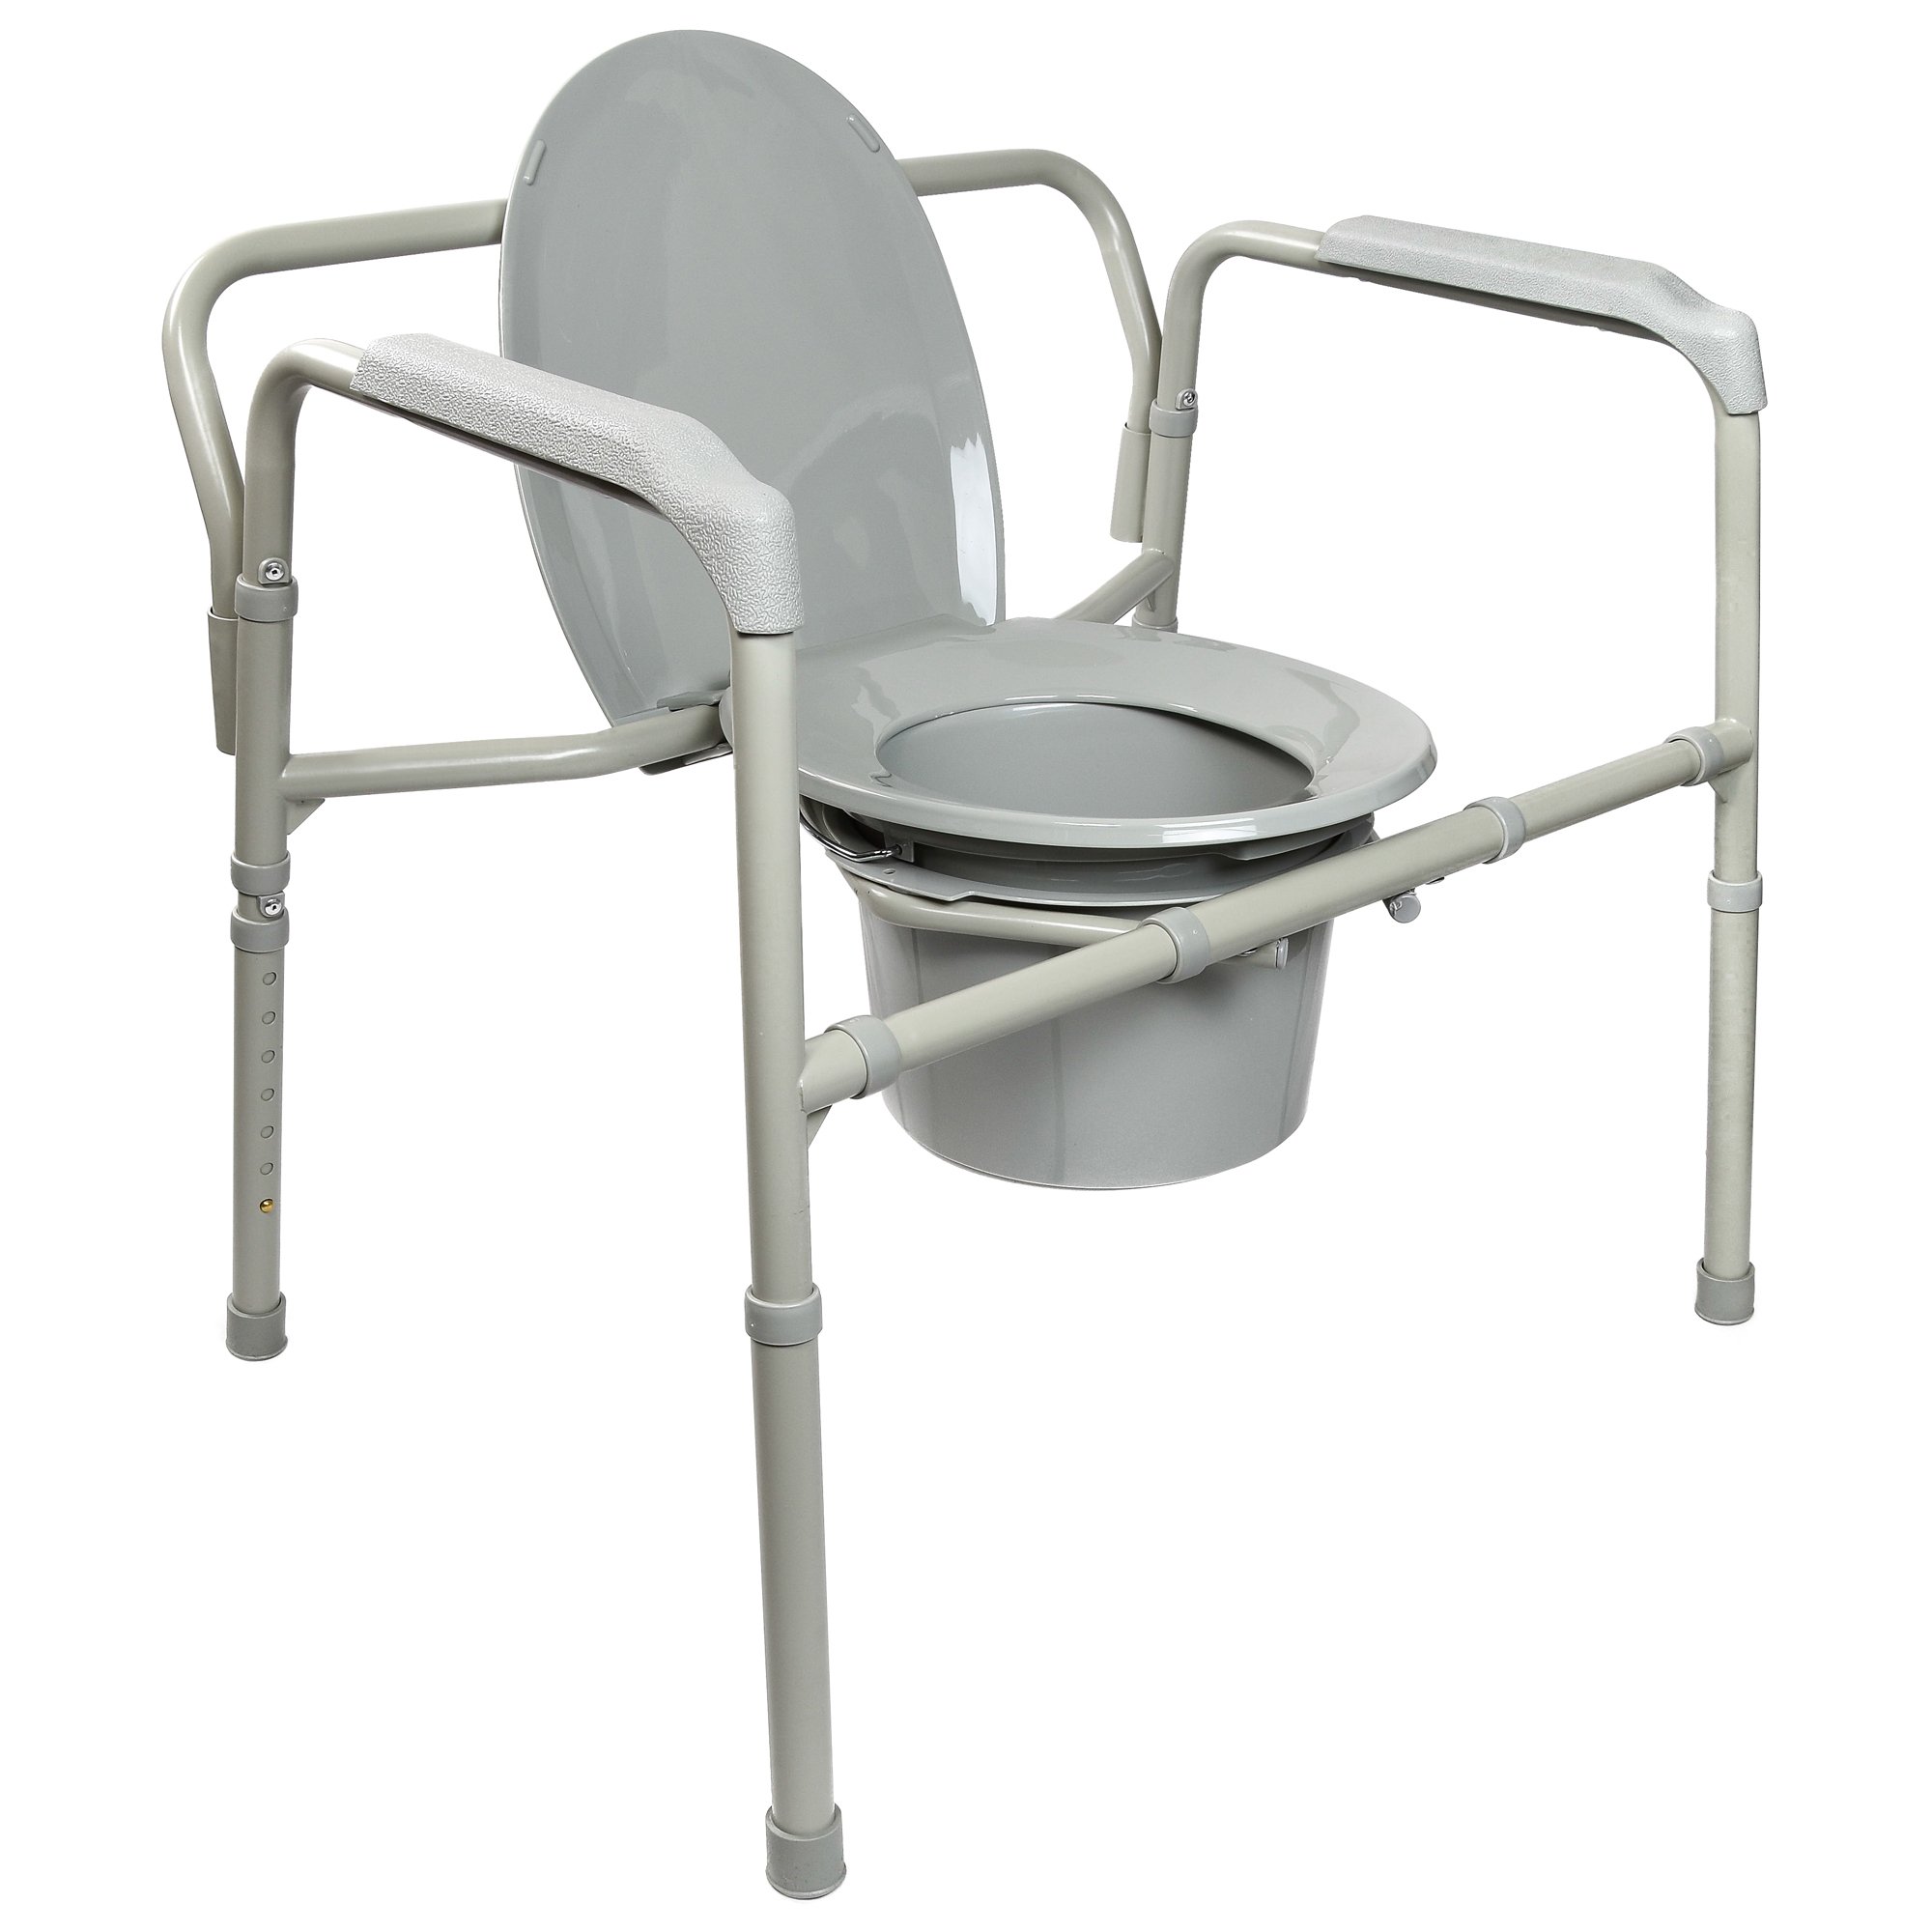 McKesson Commode Chair 13-3/4 Inch Seat Width 650 lbs. Weight Capacity, Gray